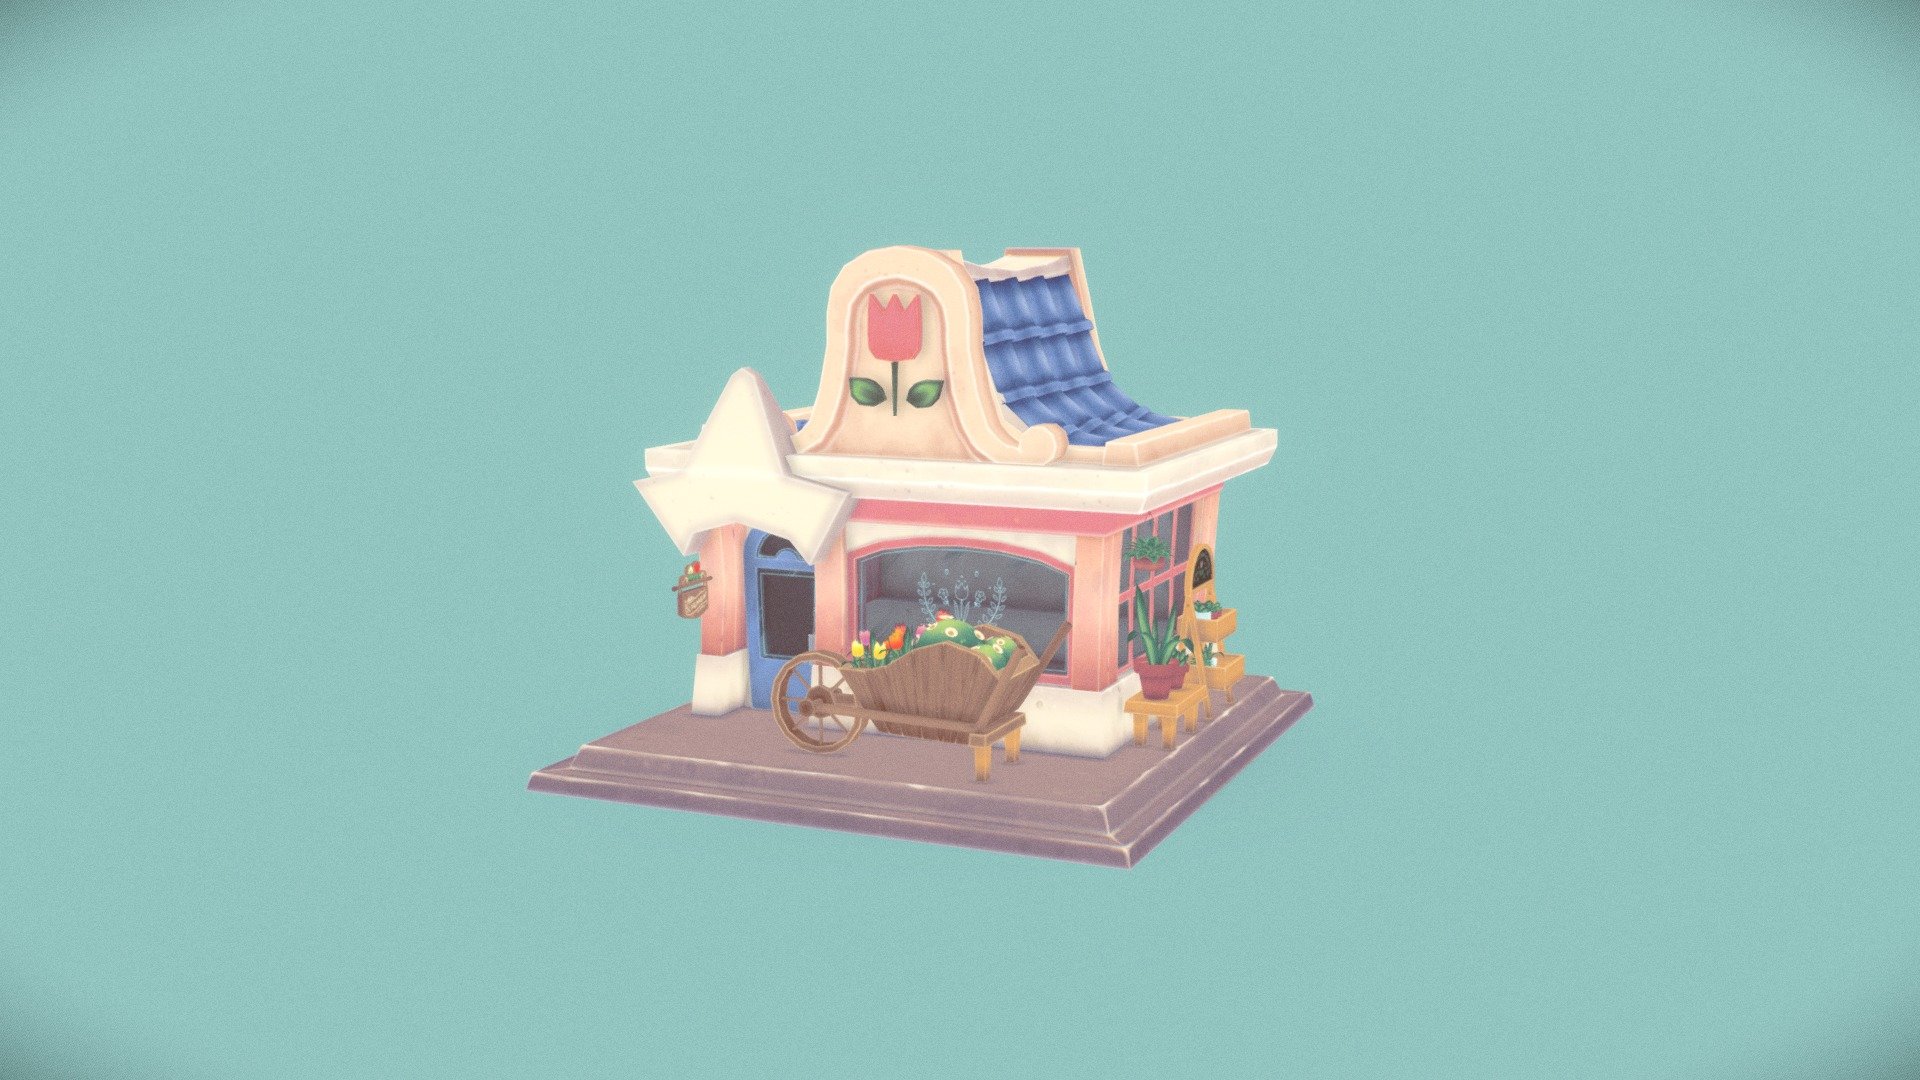 This is a Bloemenwinkel a Dutch styled Flower shop!!!
p.s This is a test for class XDXDXD Enjoy - Flower Shop - 3D model by shixye 3d model